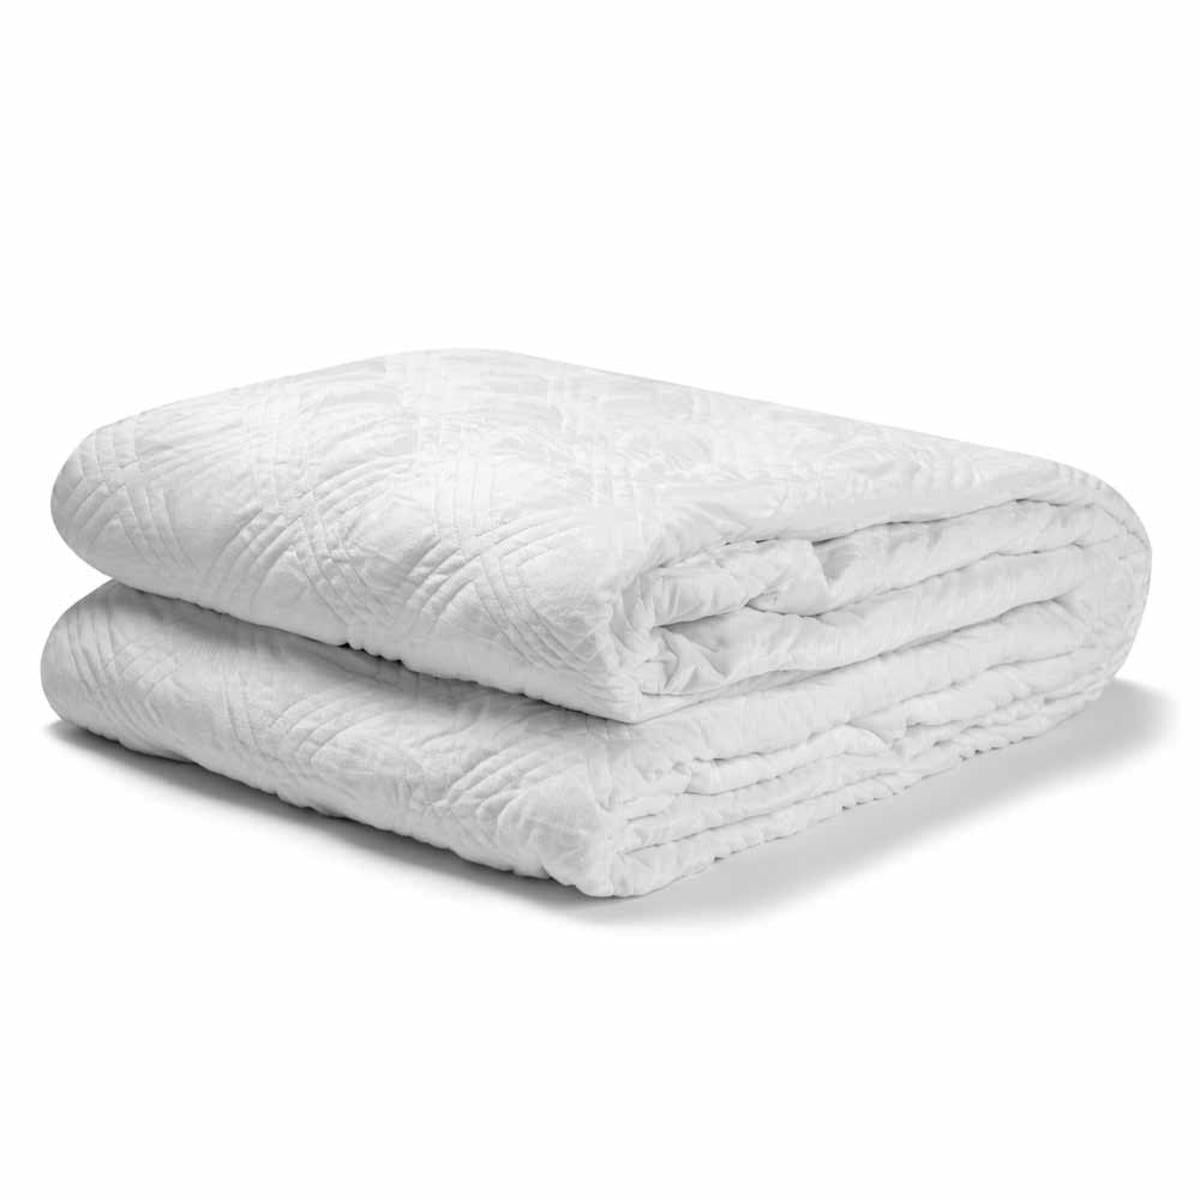 Hush 15 lb Classic Blanket with Duvet Cover - Twin/60x80